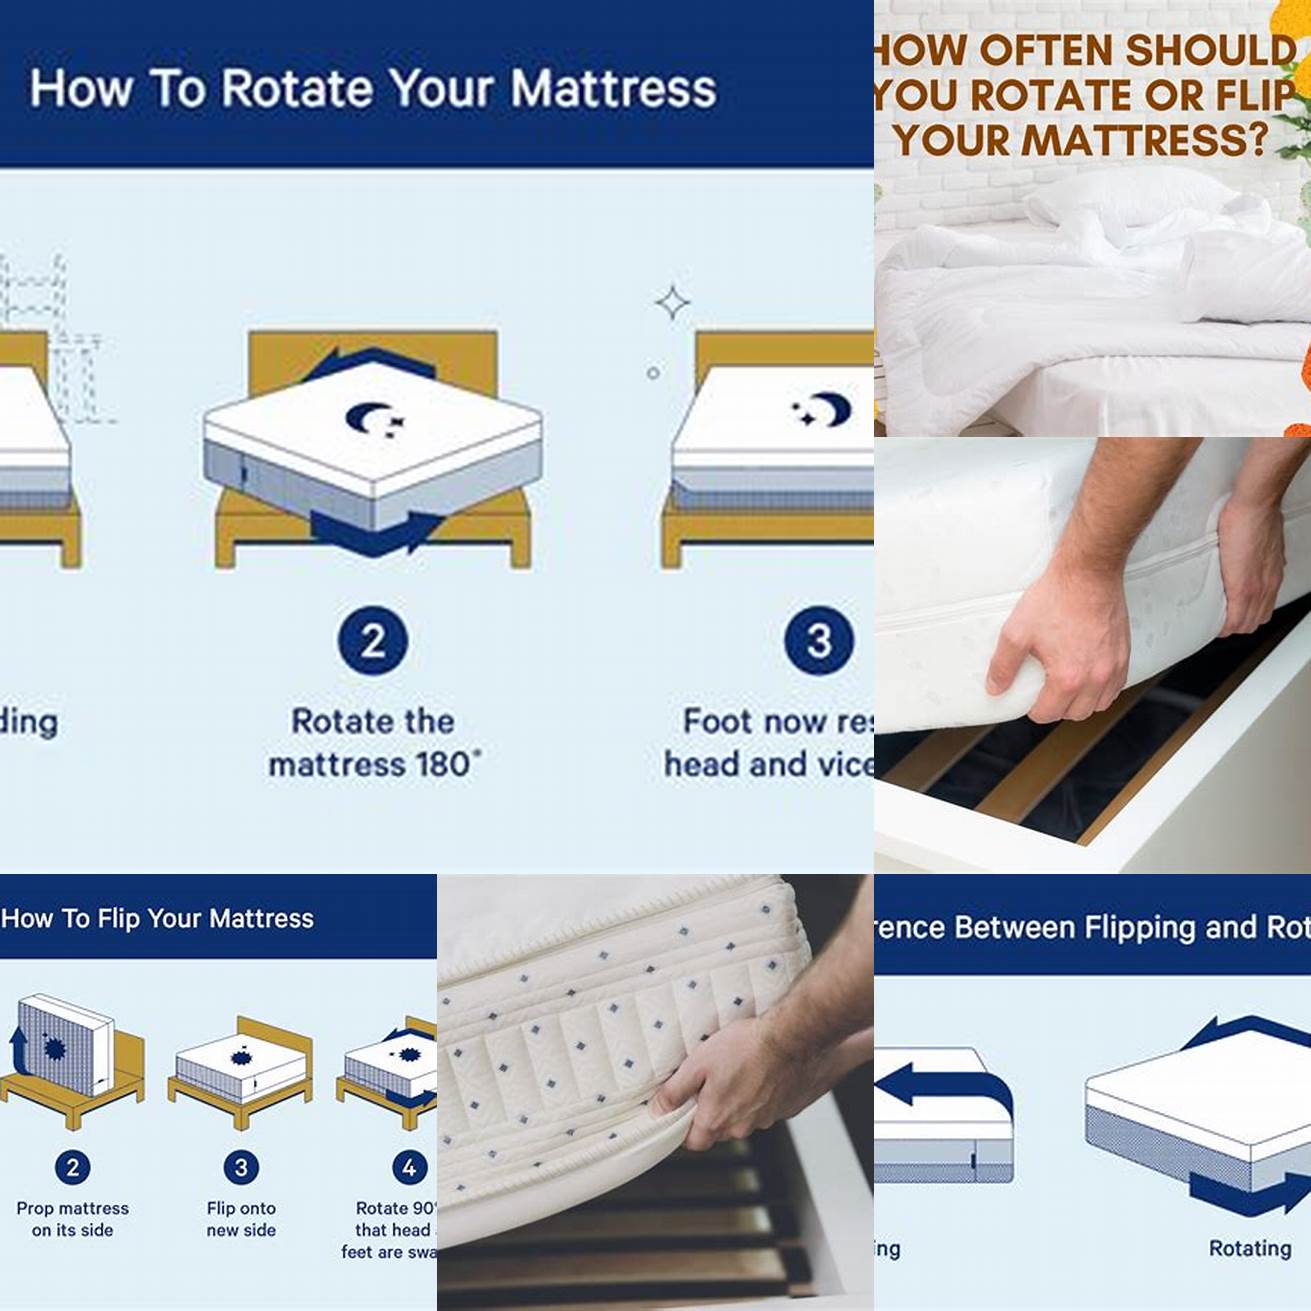 Rotate your mattress regularly to prevent uneven wear